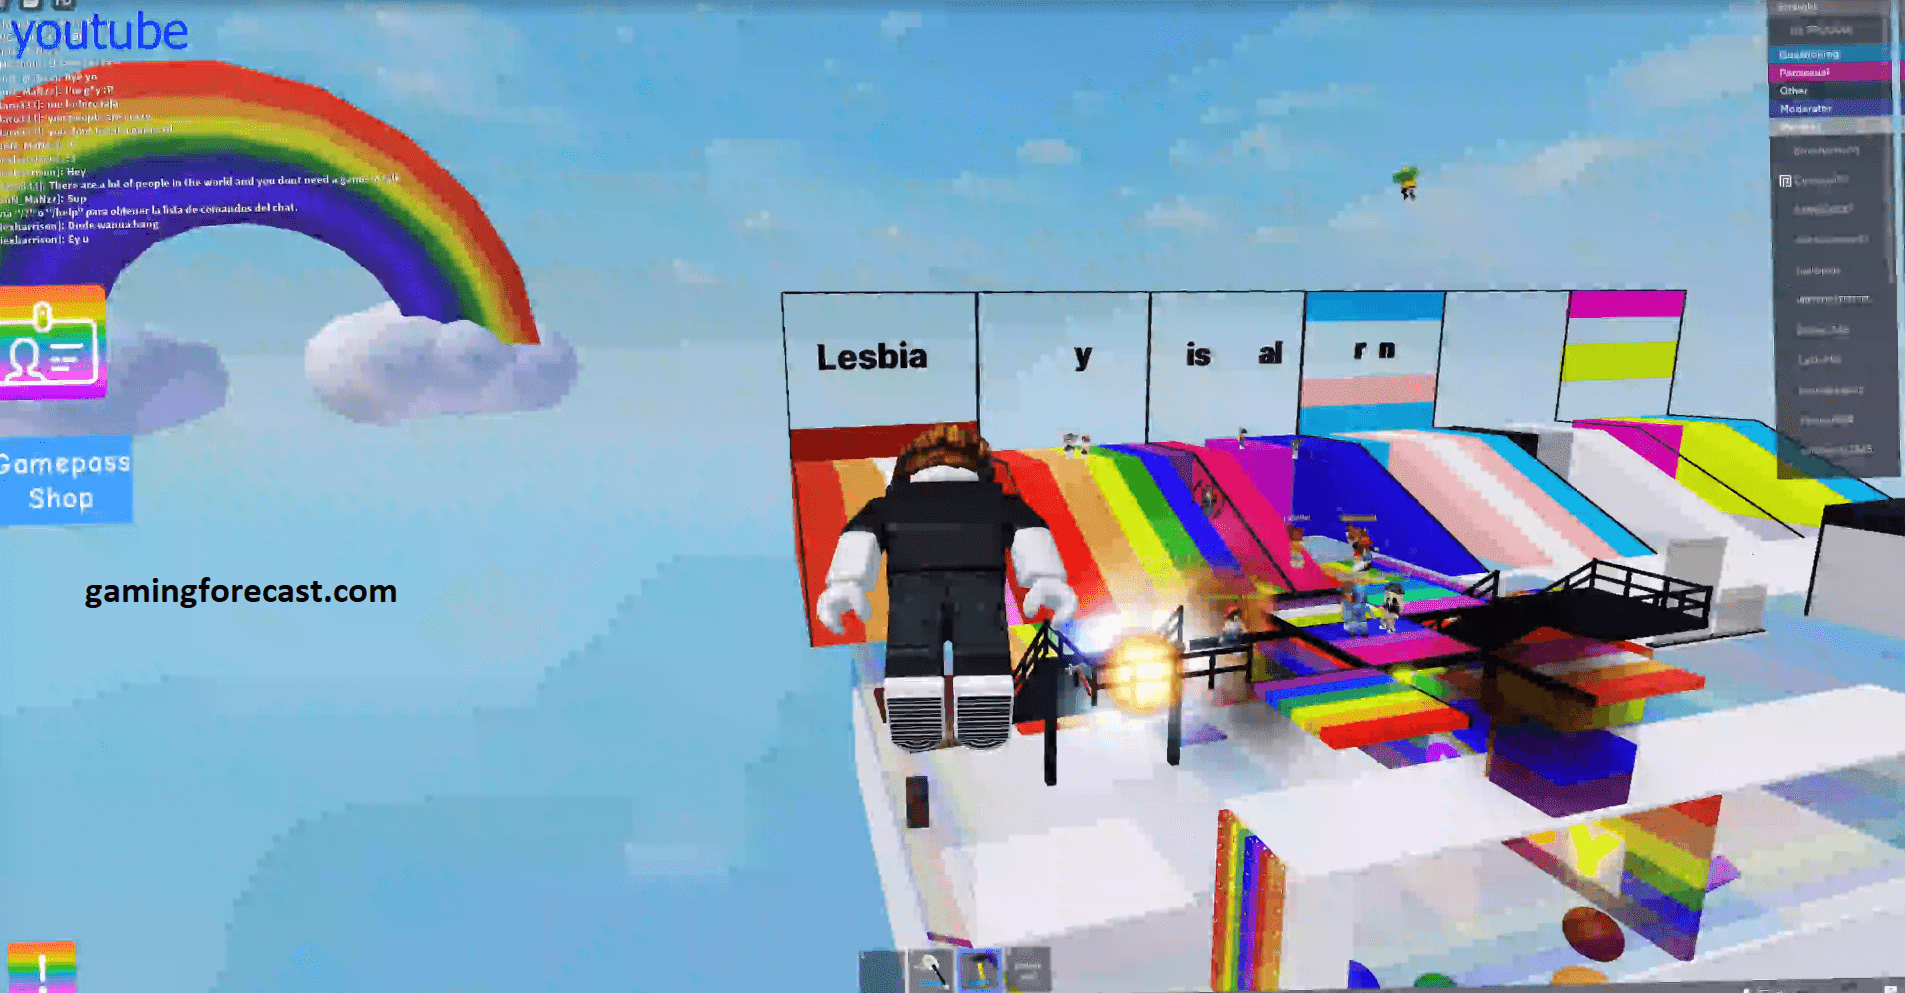 Roblox Hack Download Pc Destroy Lobby Fly Aimbot Scripts 2021 Gaming Forecast Download Free Online Game Hacks - tp hacks roblox